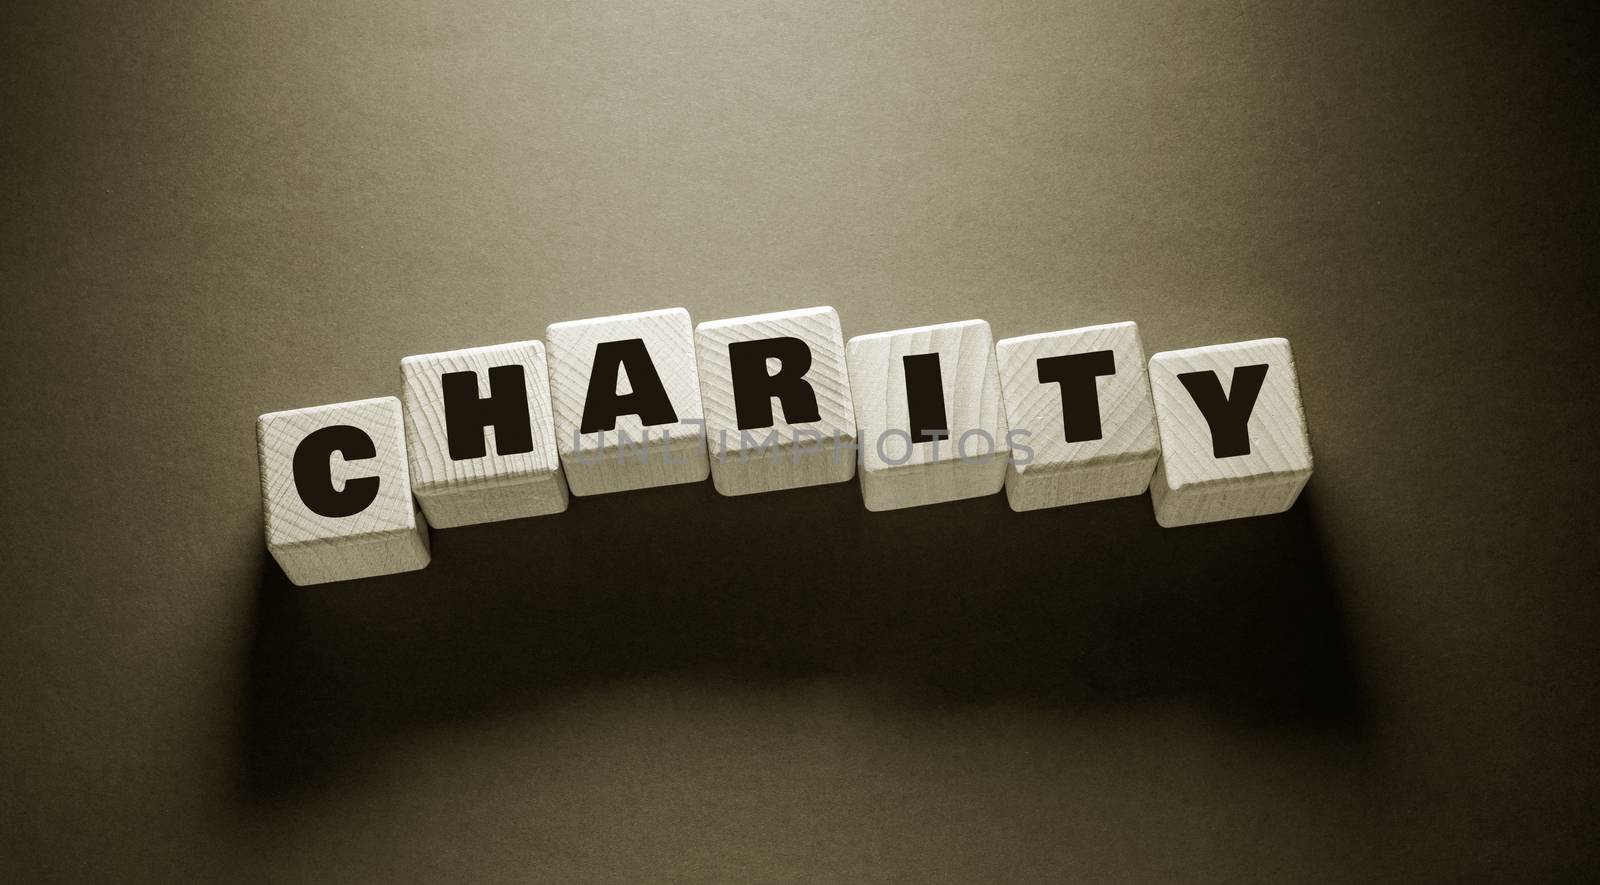 Charity Word with Wooden Cubes by Jievani